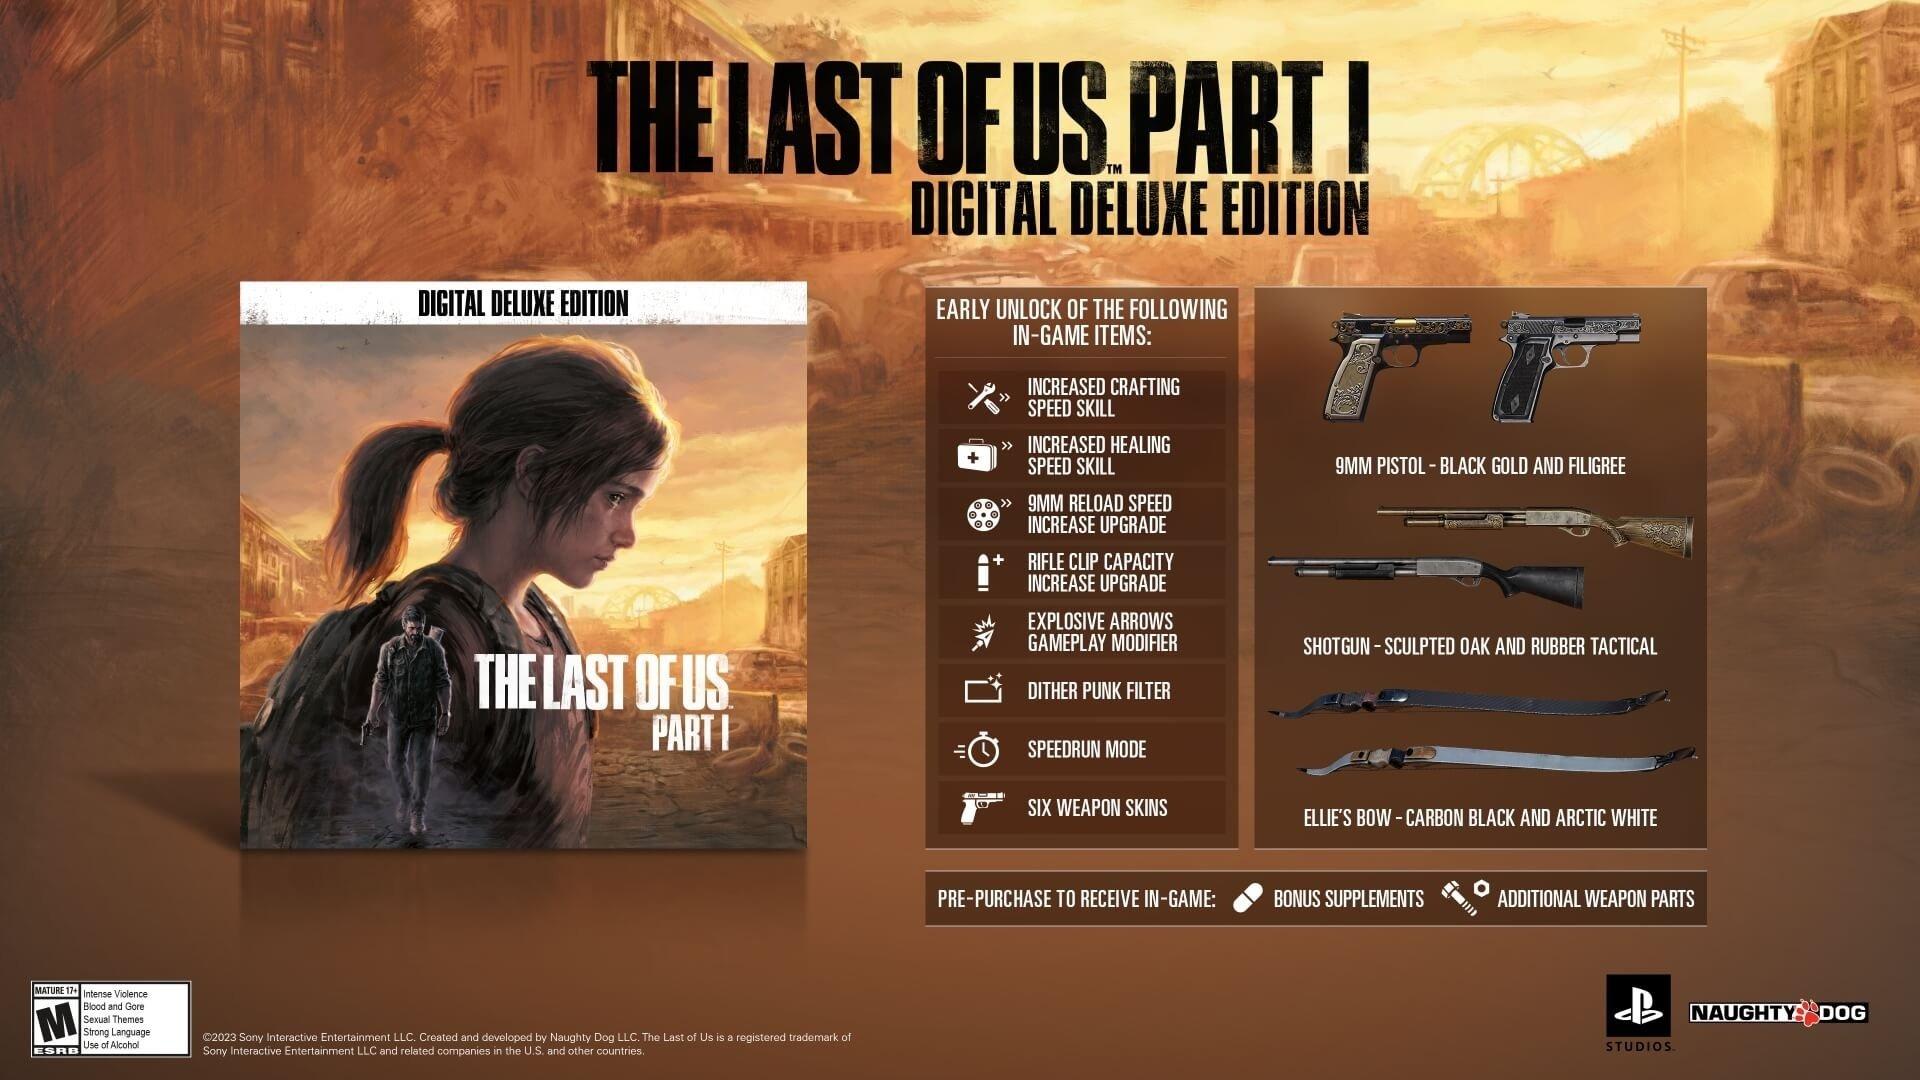 Buy The Last of Us™ Part I Digital Deluxe Edition - PC Game